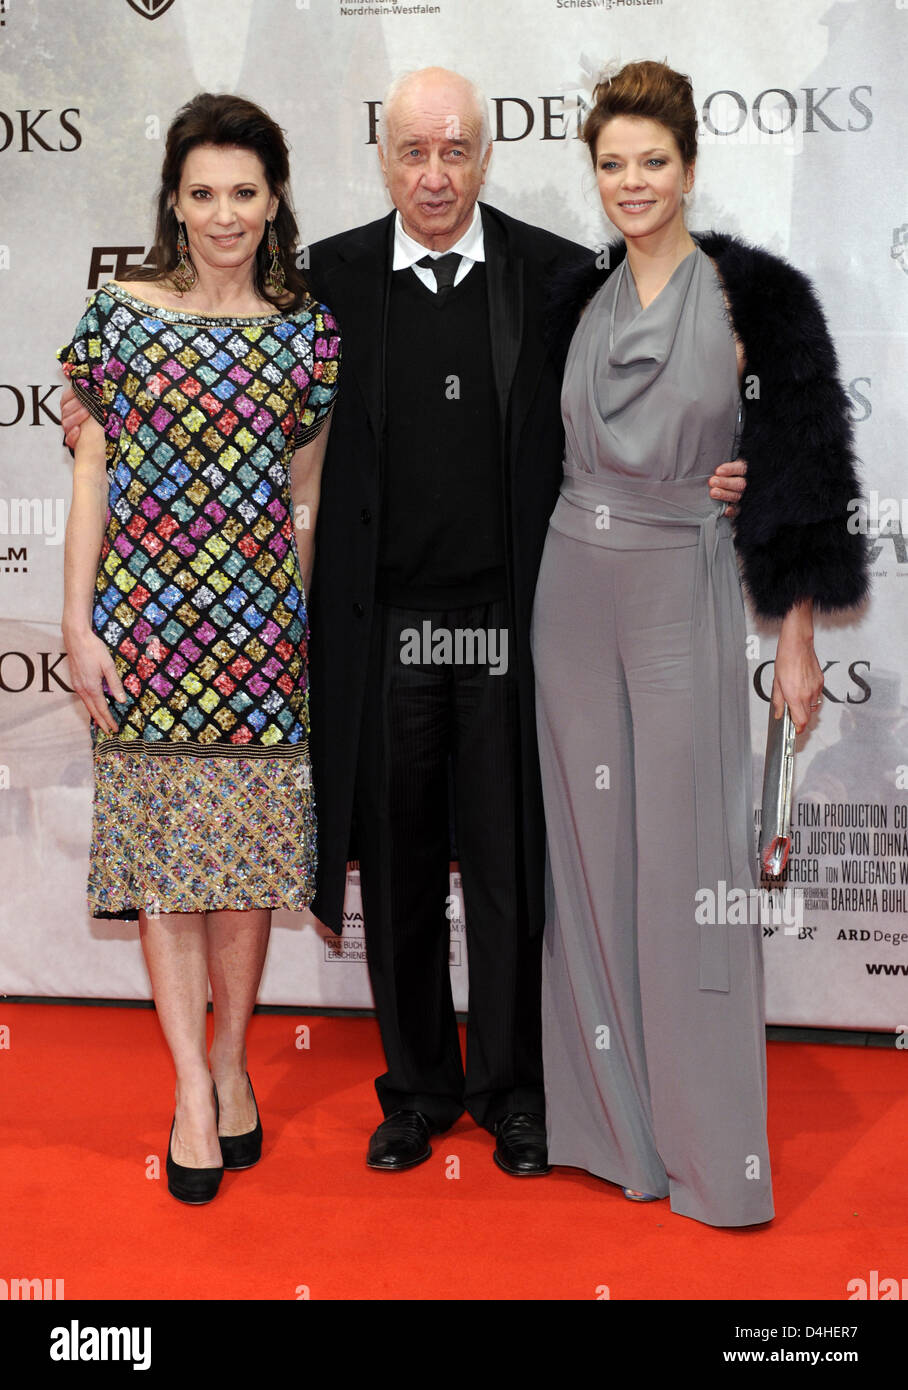 Actors and actresses Iris Berben (L-R), Arnim Mueller-Stahl and Jessica Schwarz arrive at the world premiere of the film ?Buddenbrooks? at ?Lichtburg? venue in Essen, Germany, 16 December 2008. The film based on the homonymous novel by Thomas Mann tells the story of the rise and fall of a rich German merchant family at the turn of the 19th and 20th century. ?Buddenbrooks? will be s Stock Photo